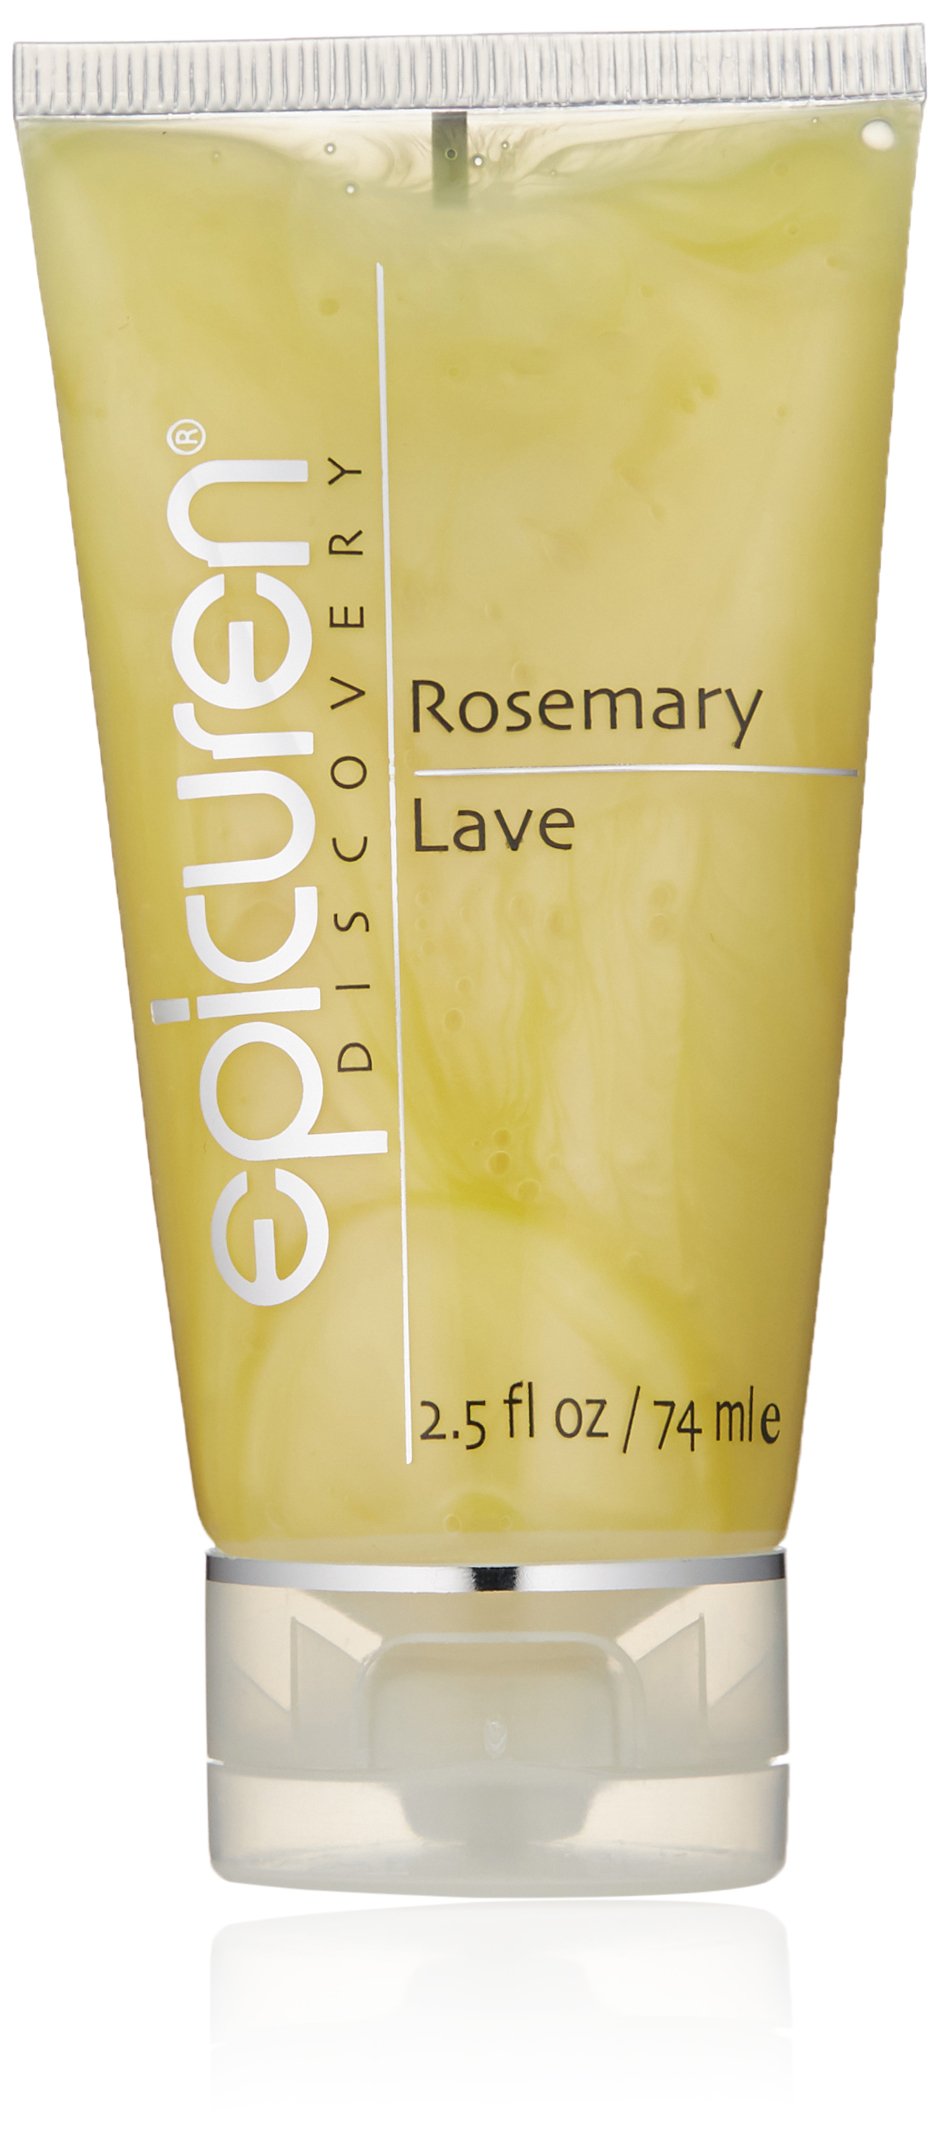 Epicuren Discovery Rosemary Lave, 2.5 Fl Oz